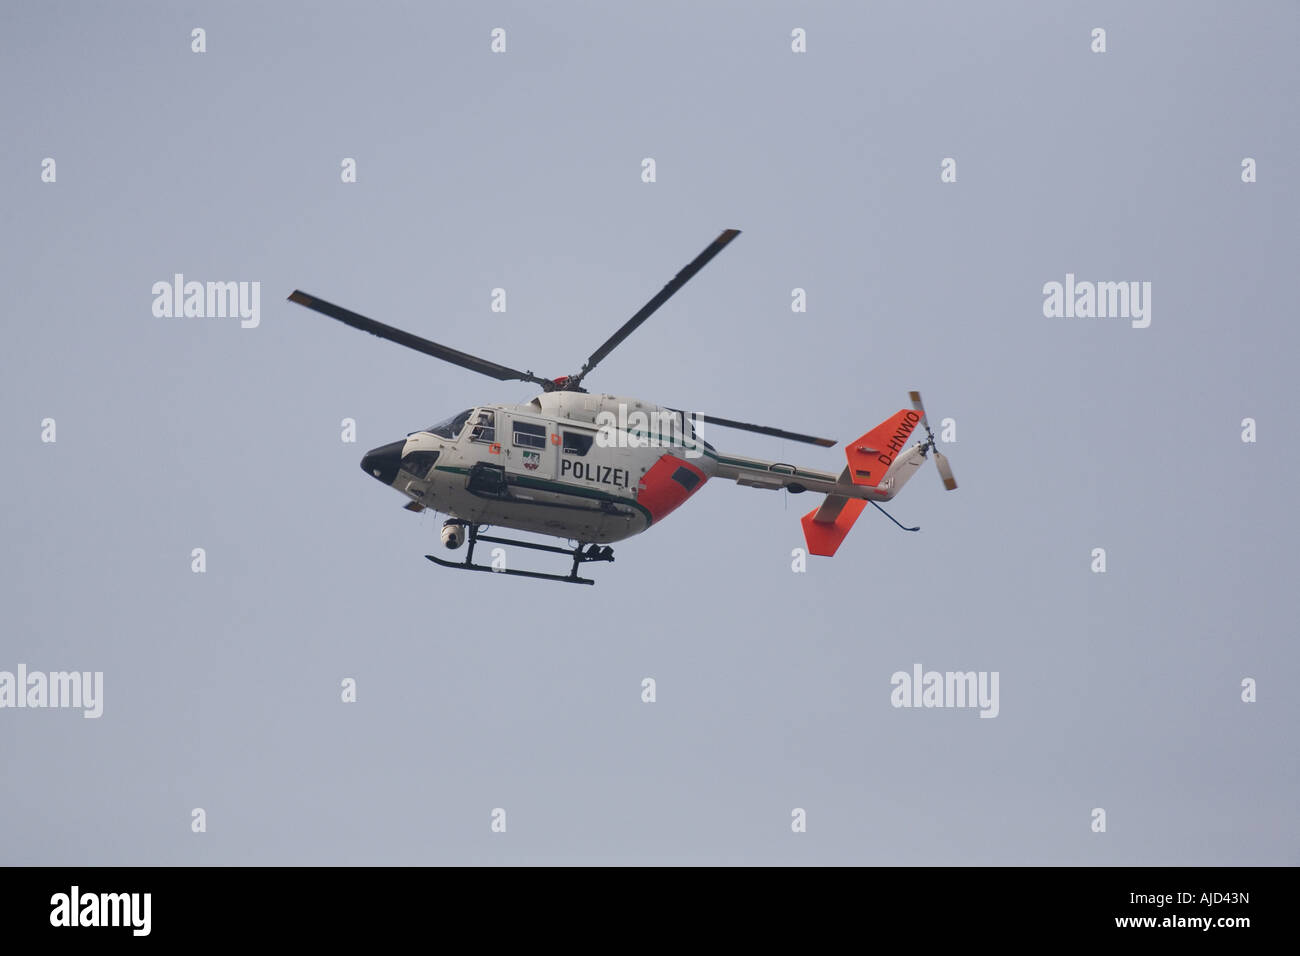 police-helicopter flying over the Love Parade, Germany, North Rhine-Westphalia, Ruhr Area, Essen  Stock Photo